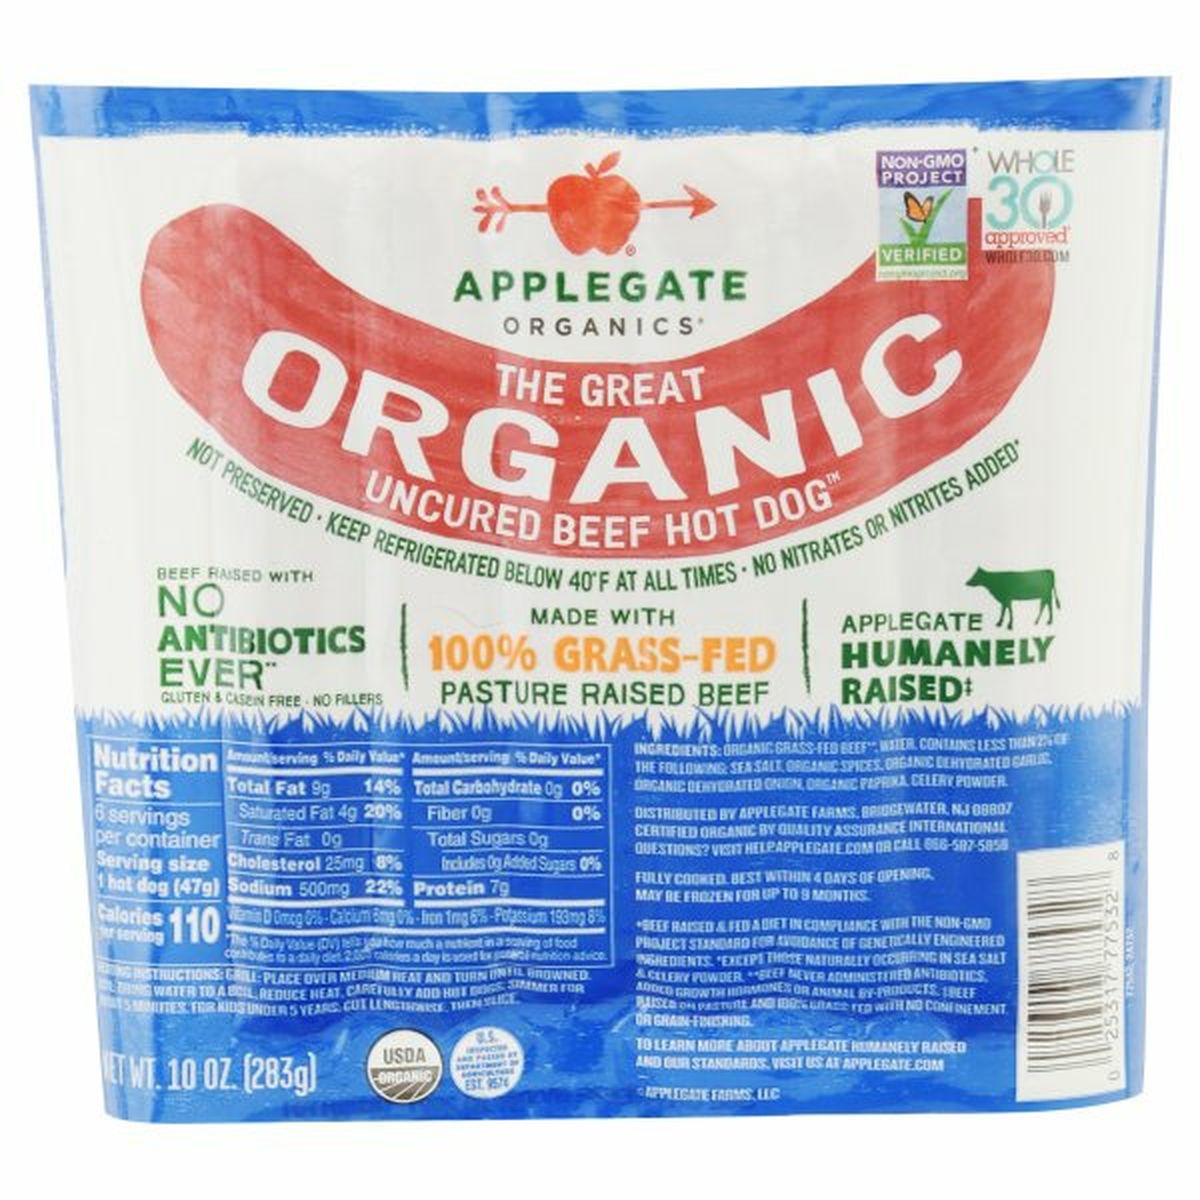 Calories in Applegate Hot Dog, Uncured Beef